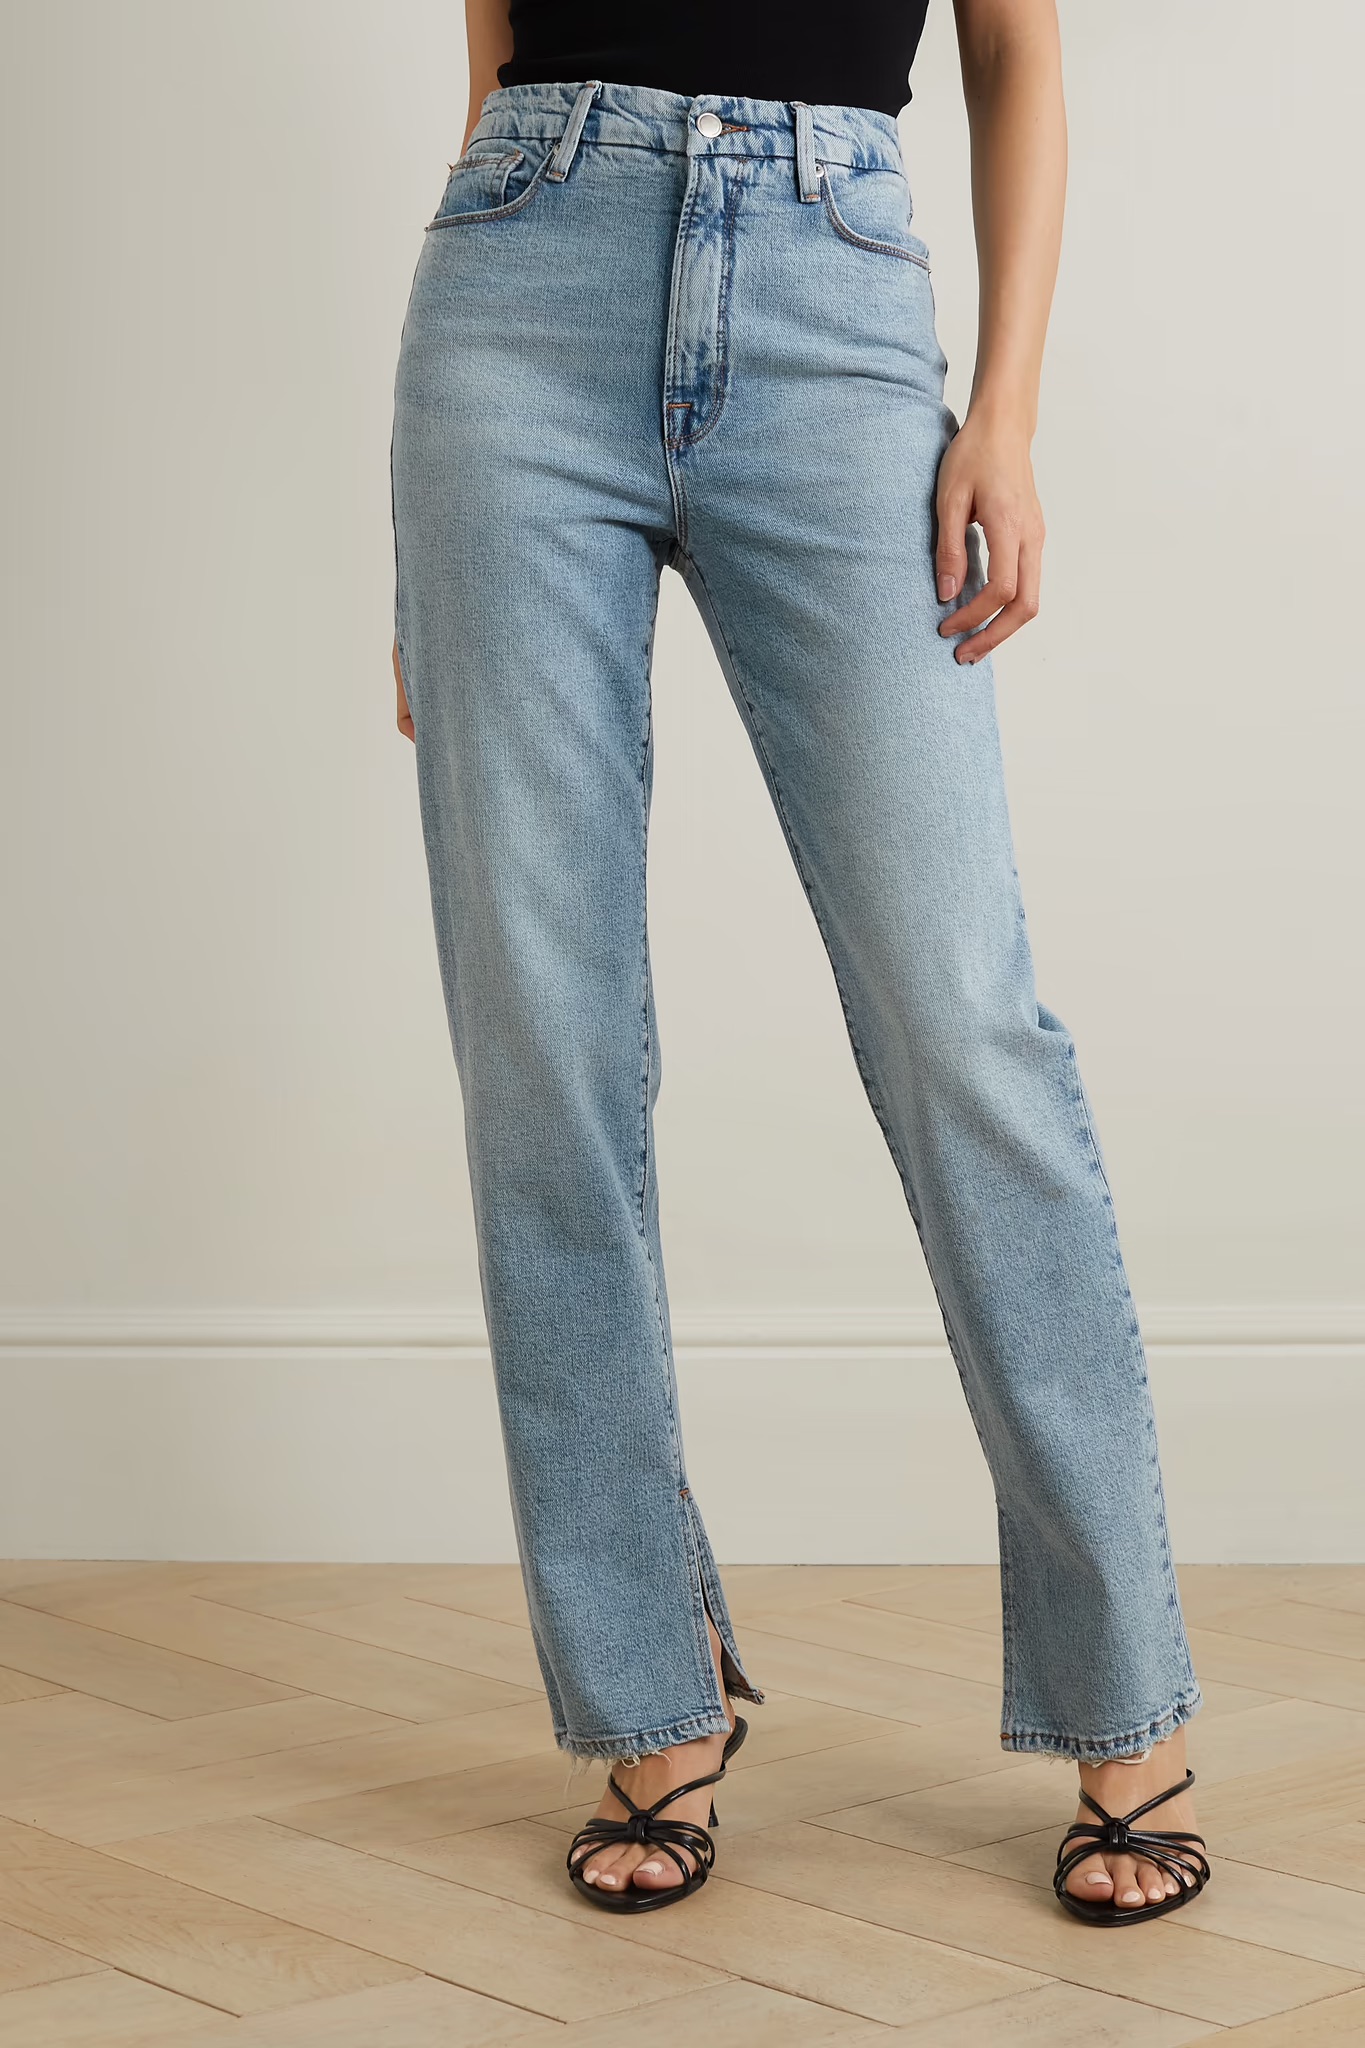 31 Pairs of the Best Affordable Jeans | Who What Wear